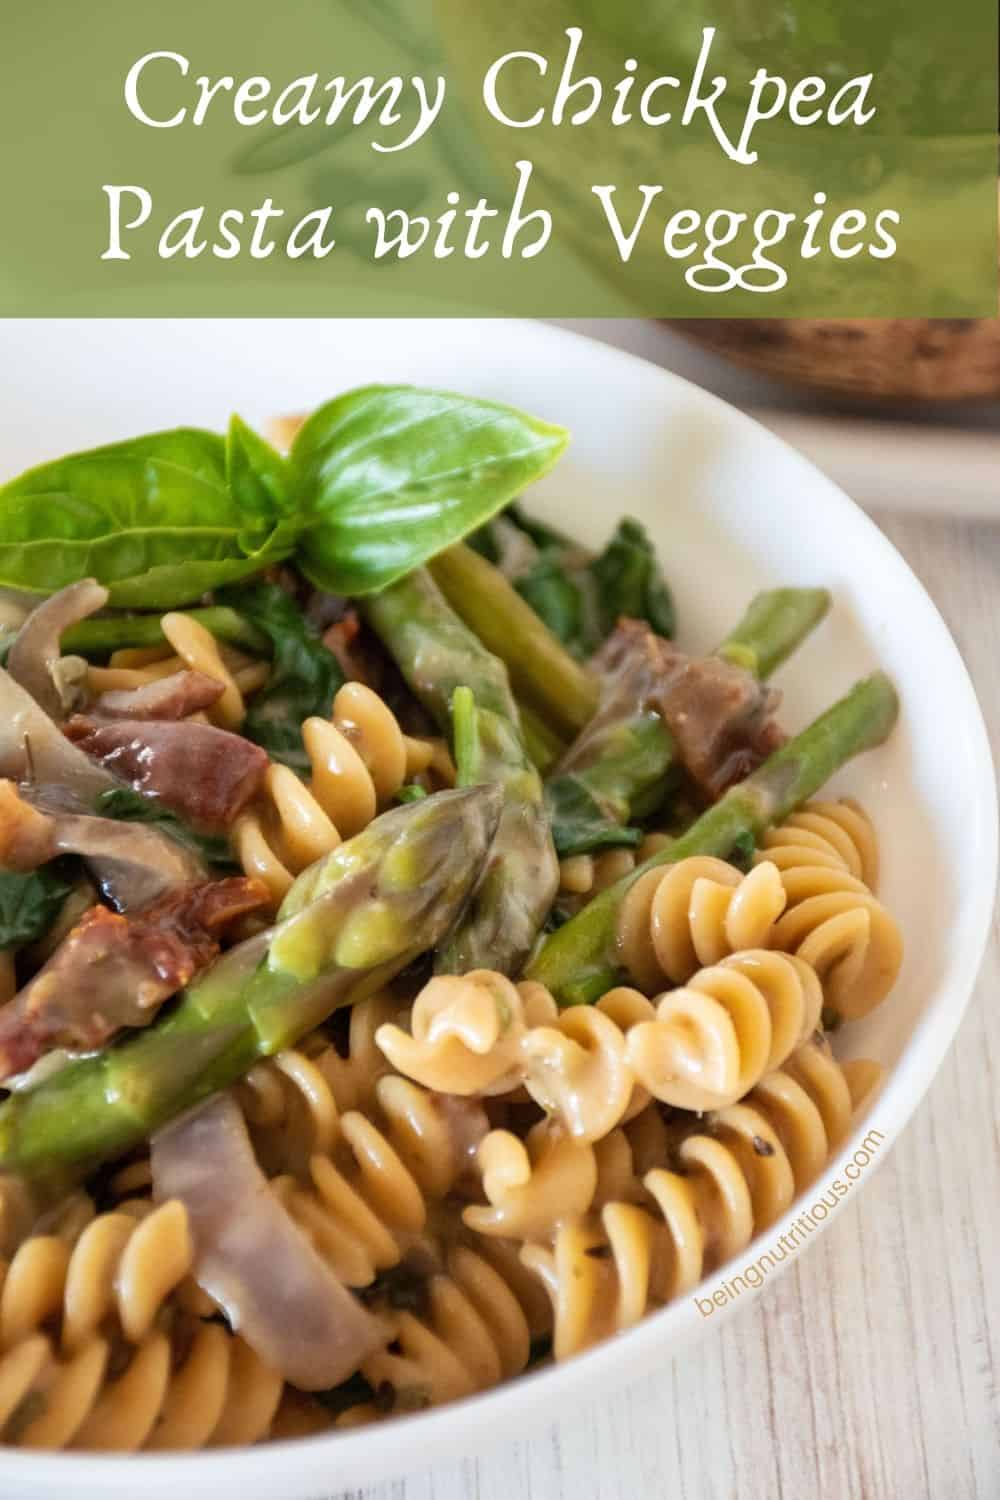 A bowl of creamy rotini pasta with vegetables. Text overlay: Creamy Chickpea Pasta with Veggies